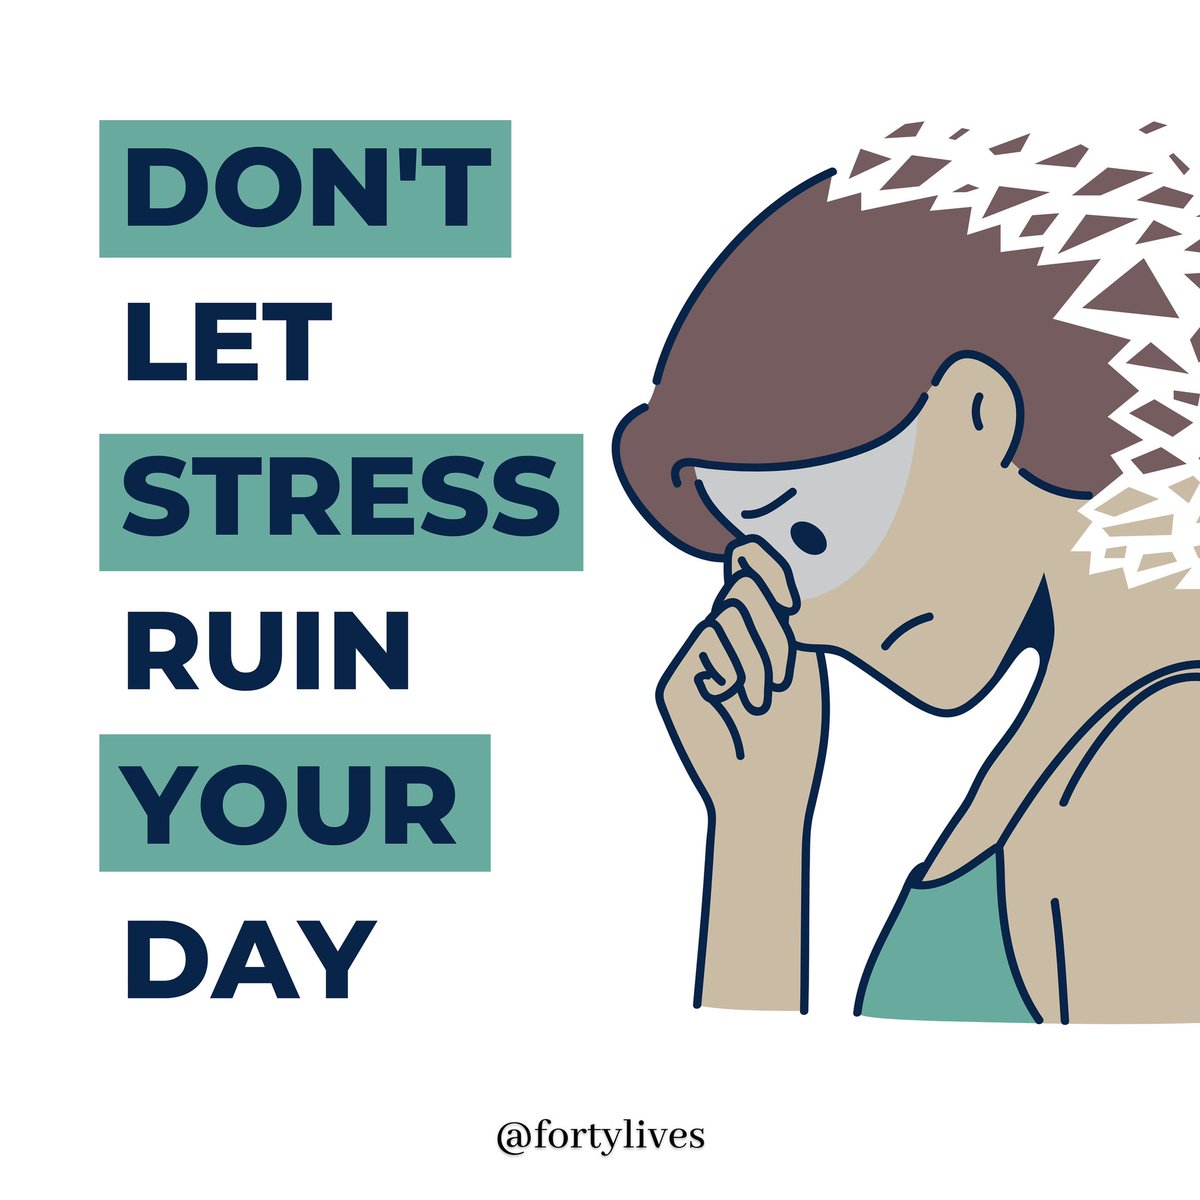 Remember stress is inevitable, but effective stress management will make you happier, healthier and more productive. 

#StressManagement #DoTheWork #managingstress #endthestigmanow #FortyLives